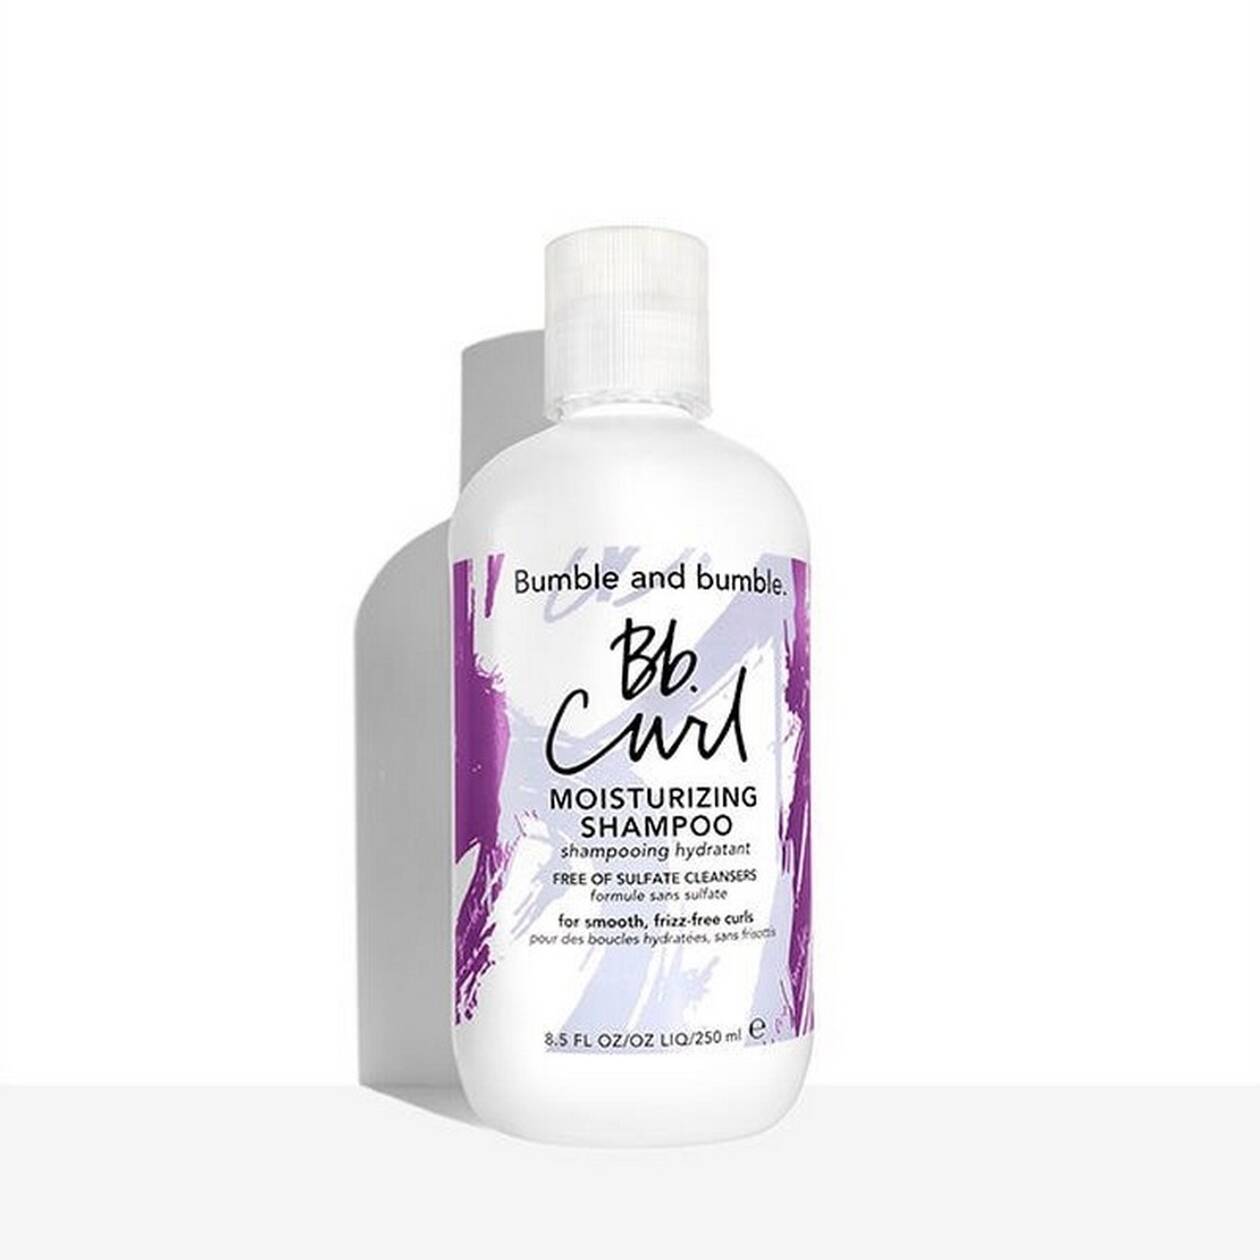 BUMBLE AND BUMBLE, CURL MOISTURIZE SHAMPOO. 